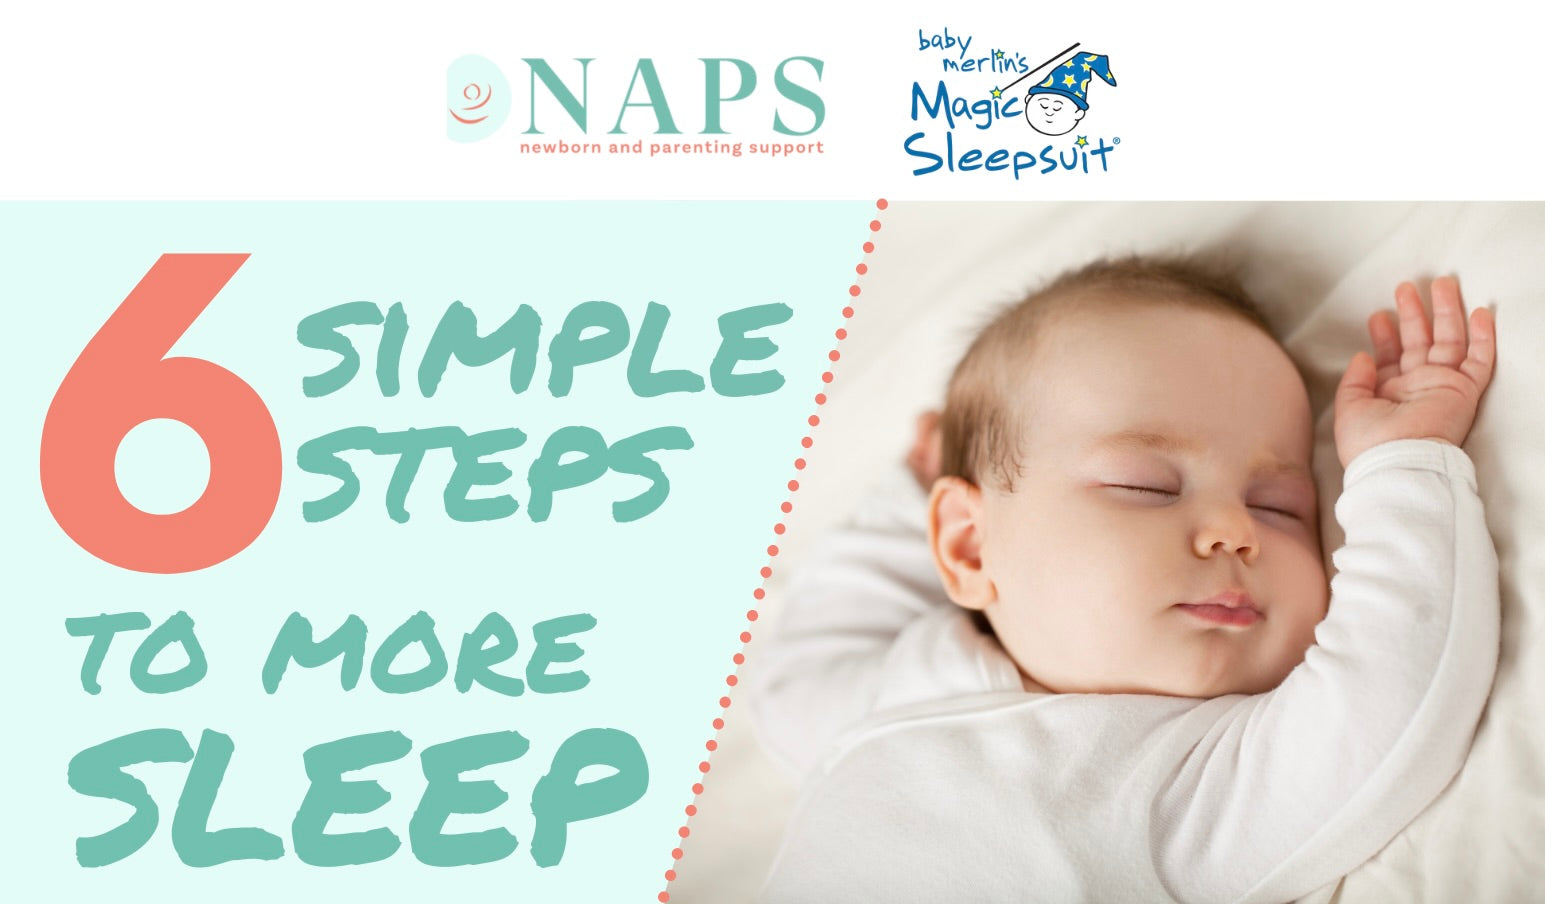 NAPS: Why is Understanding Your Baby's Sleep So Important?